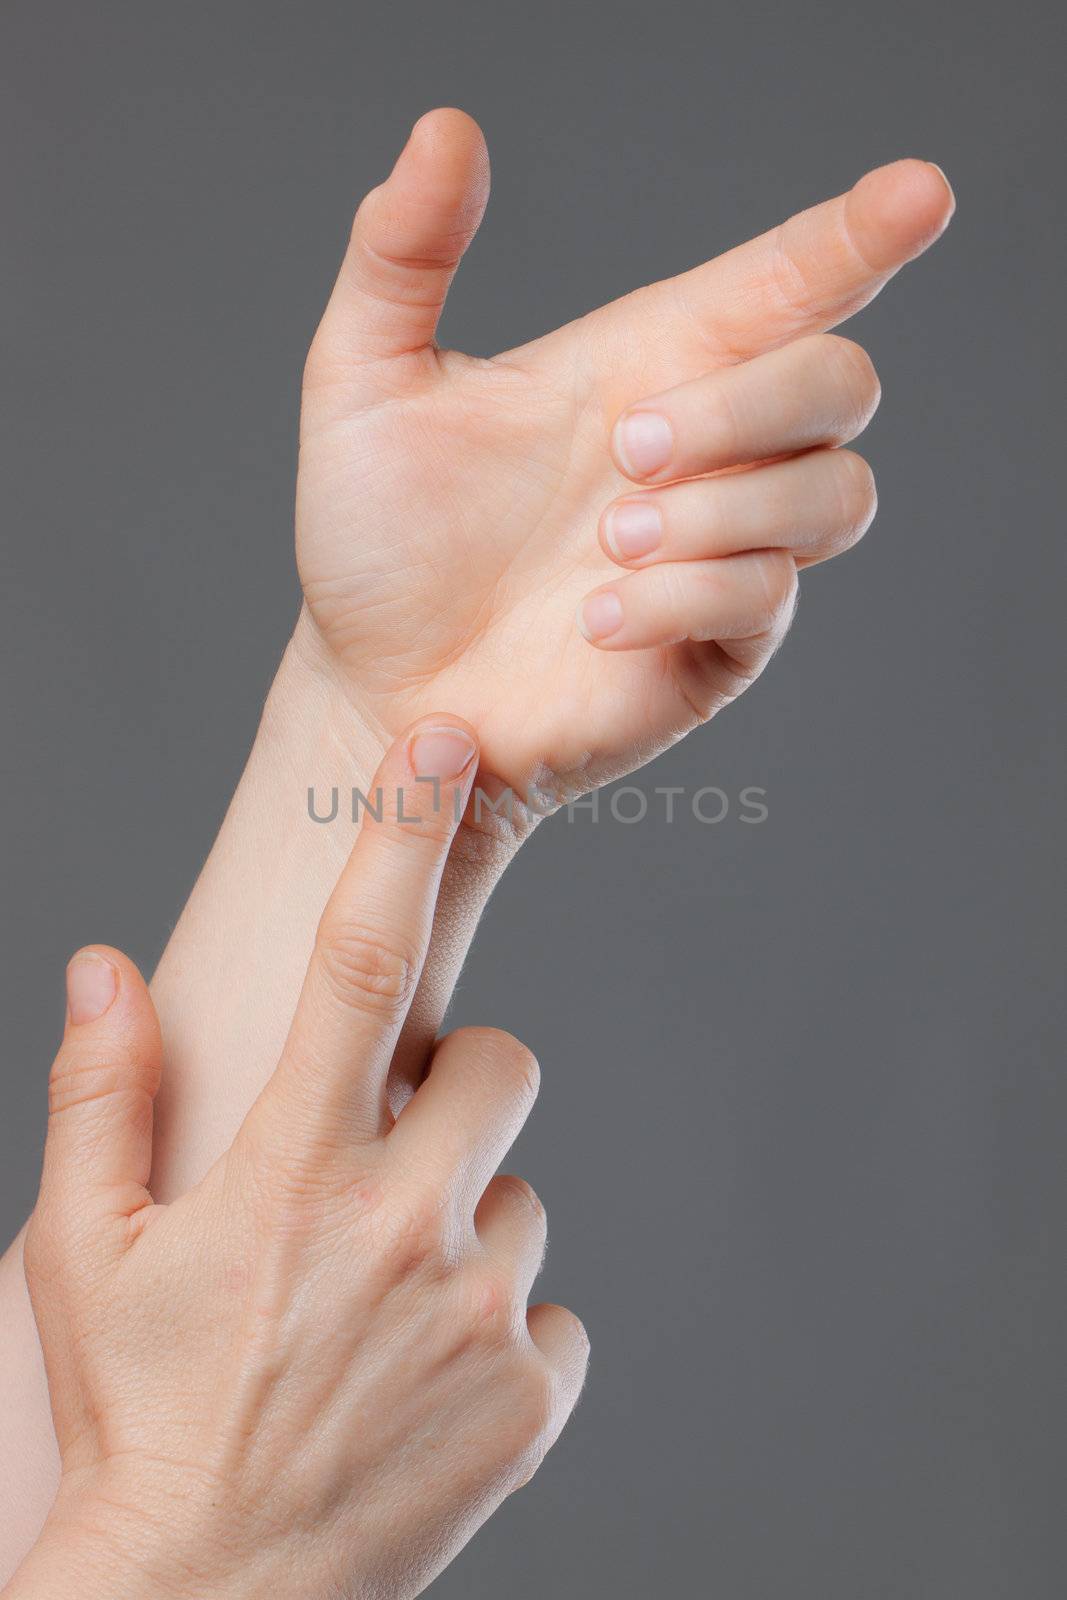 A close-up shot of hands holding and pointing at nothing. Space for text or product to be placed in hand.